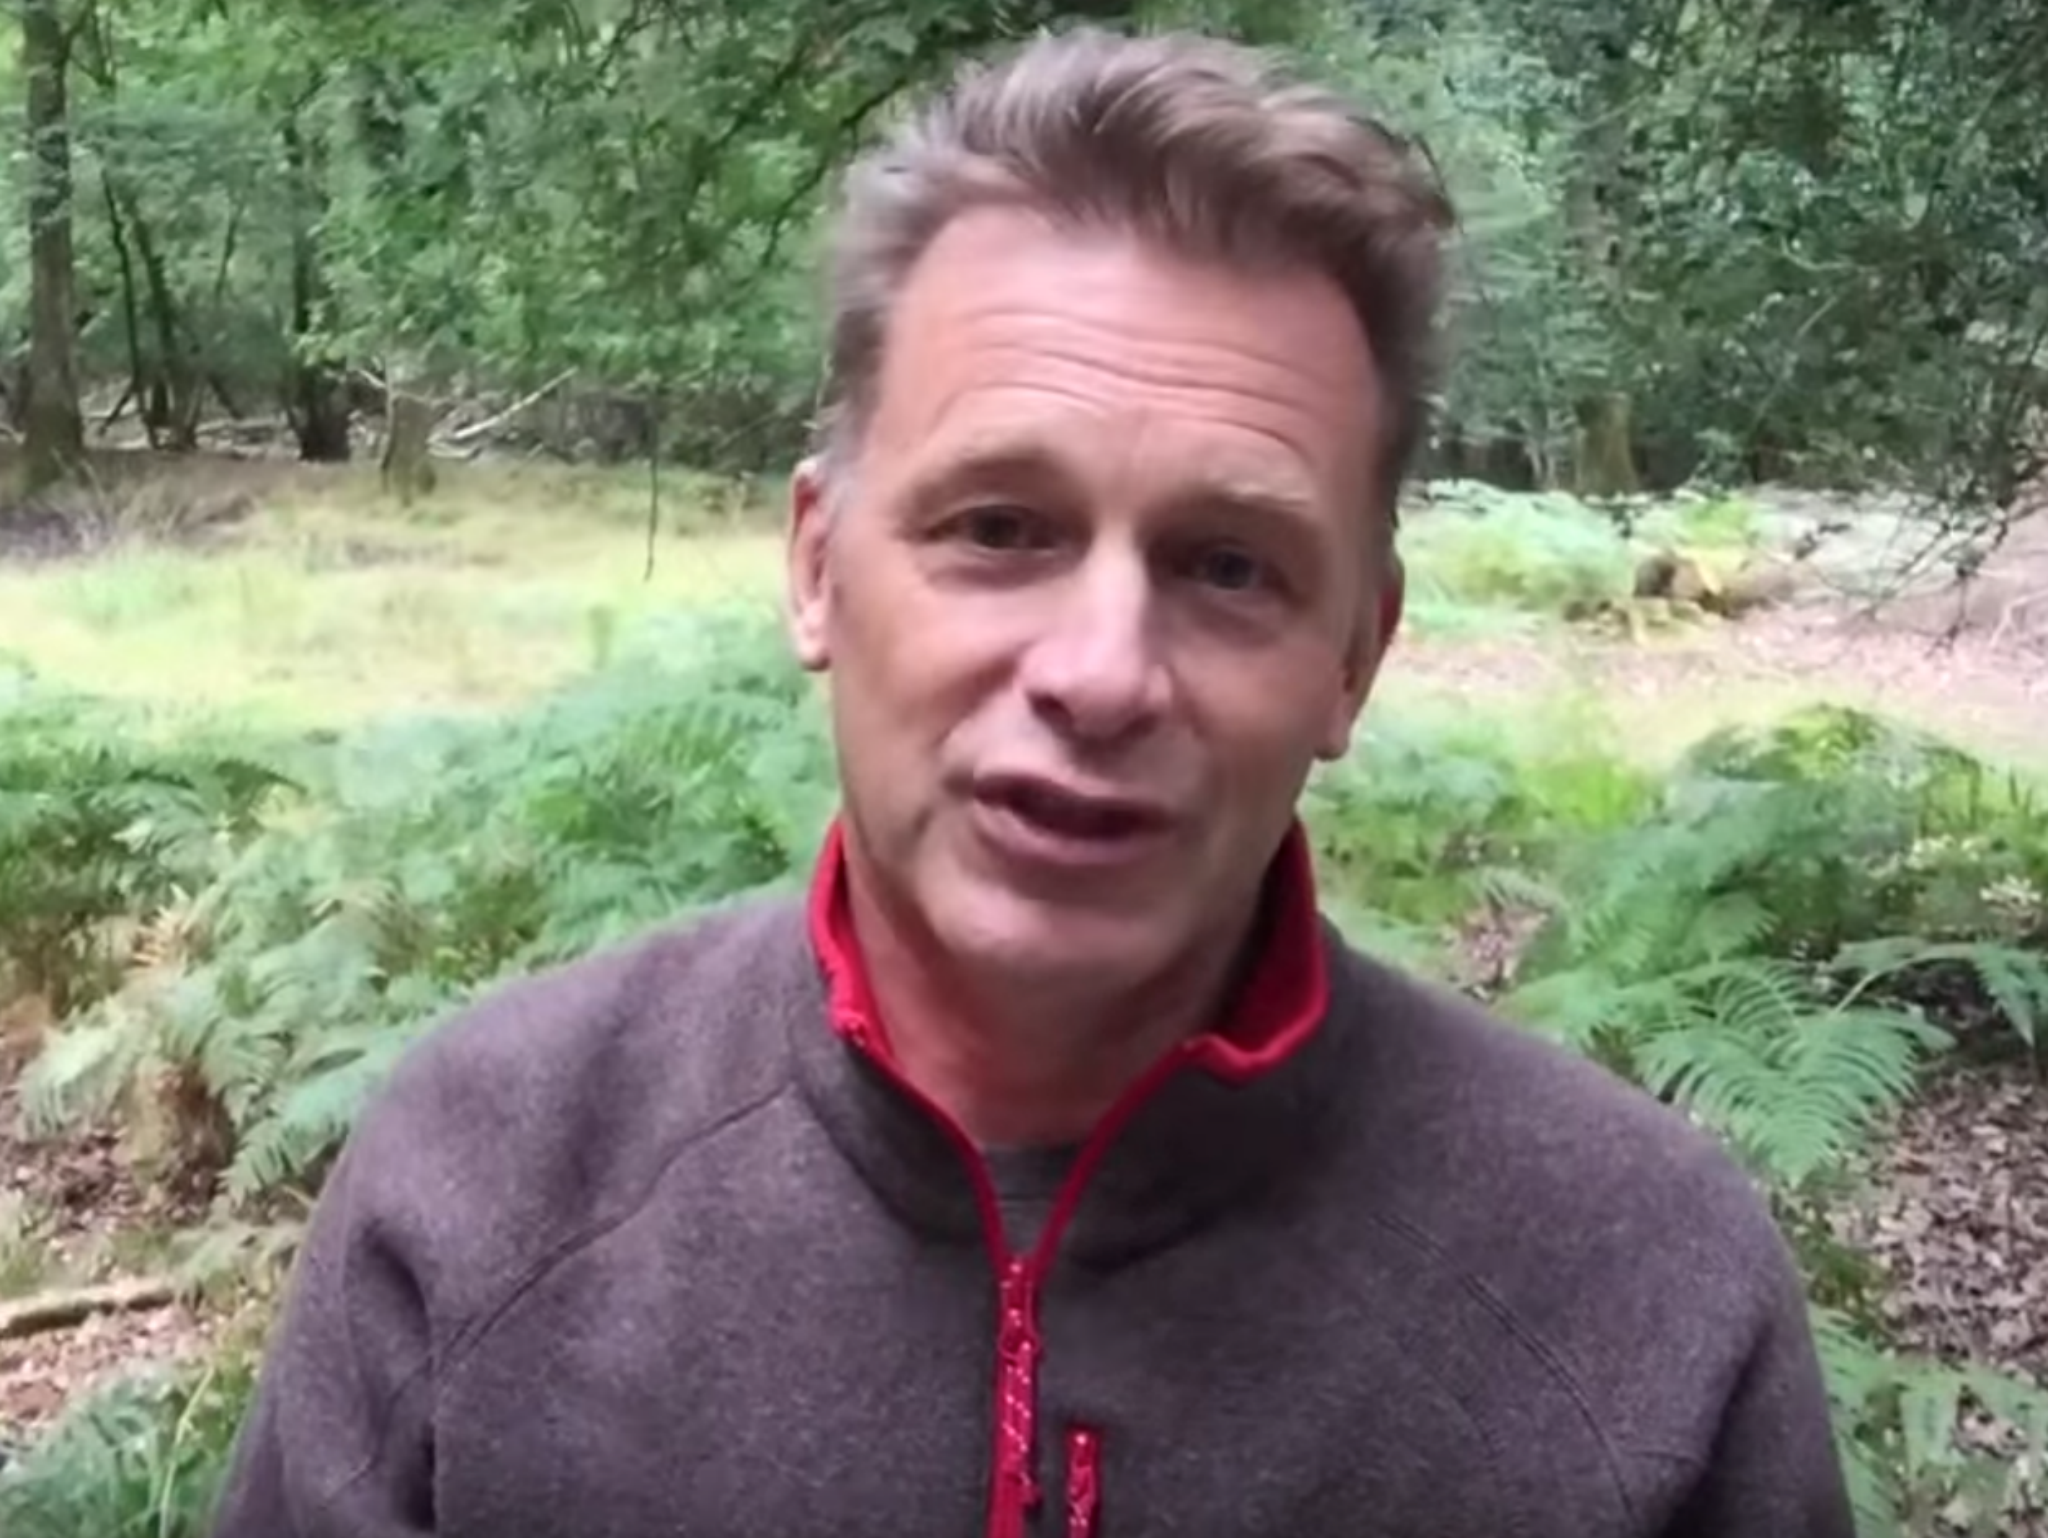 Chris Packham thanks fans for their support after more than 70,000 people signed a petition urging the BBC not to fire him